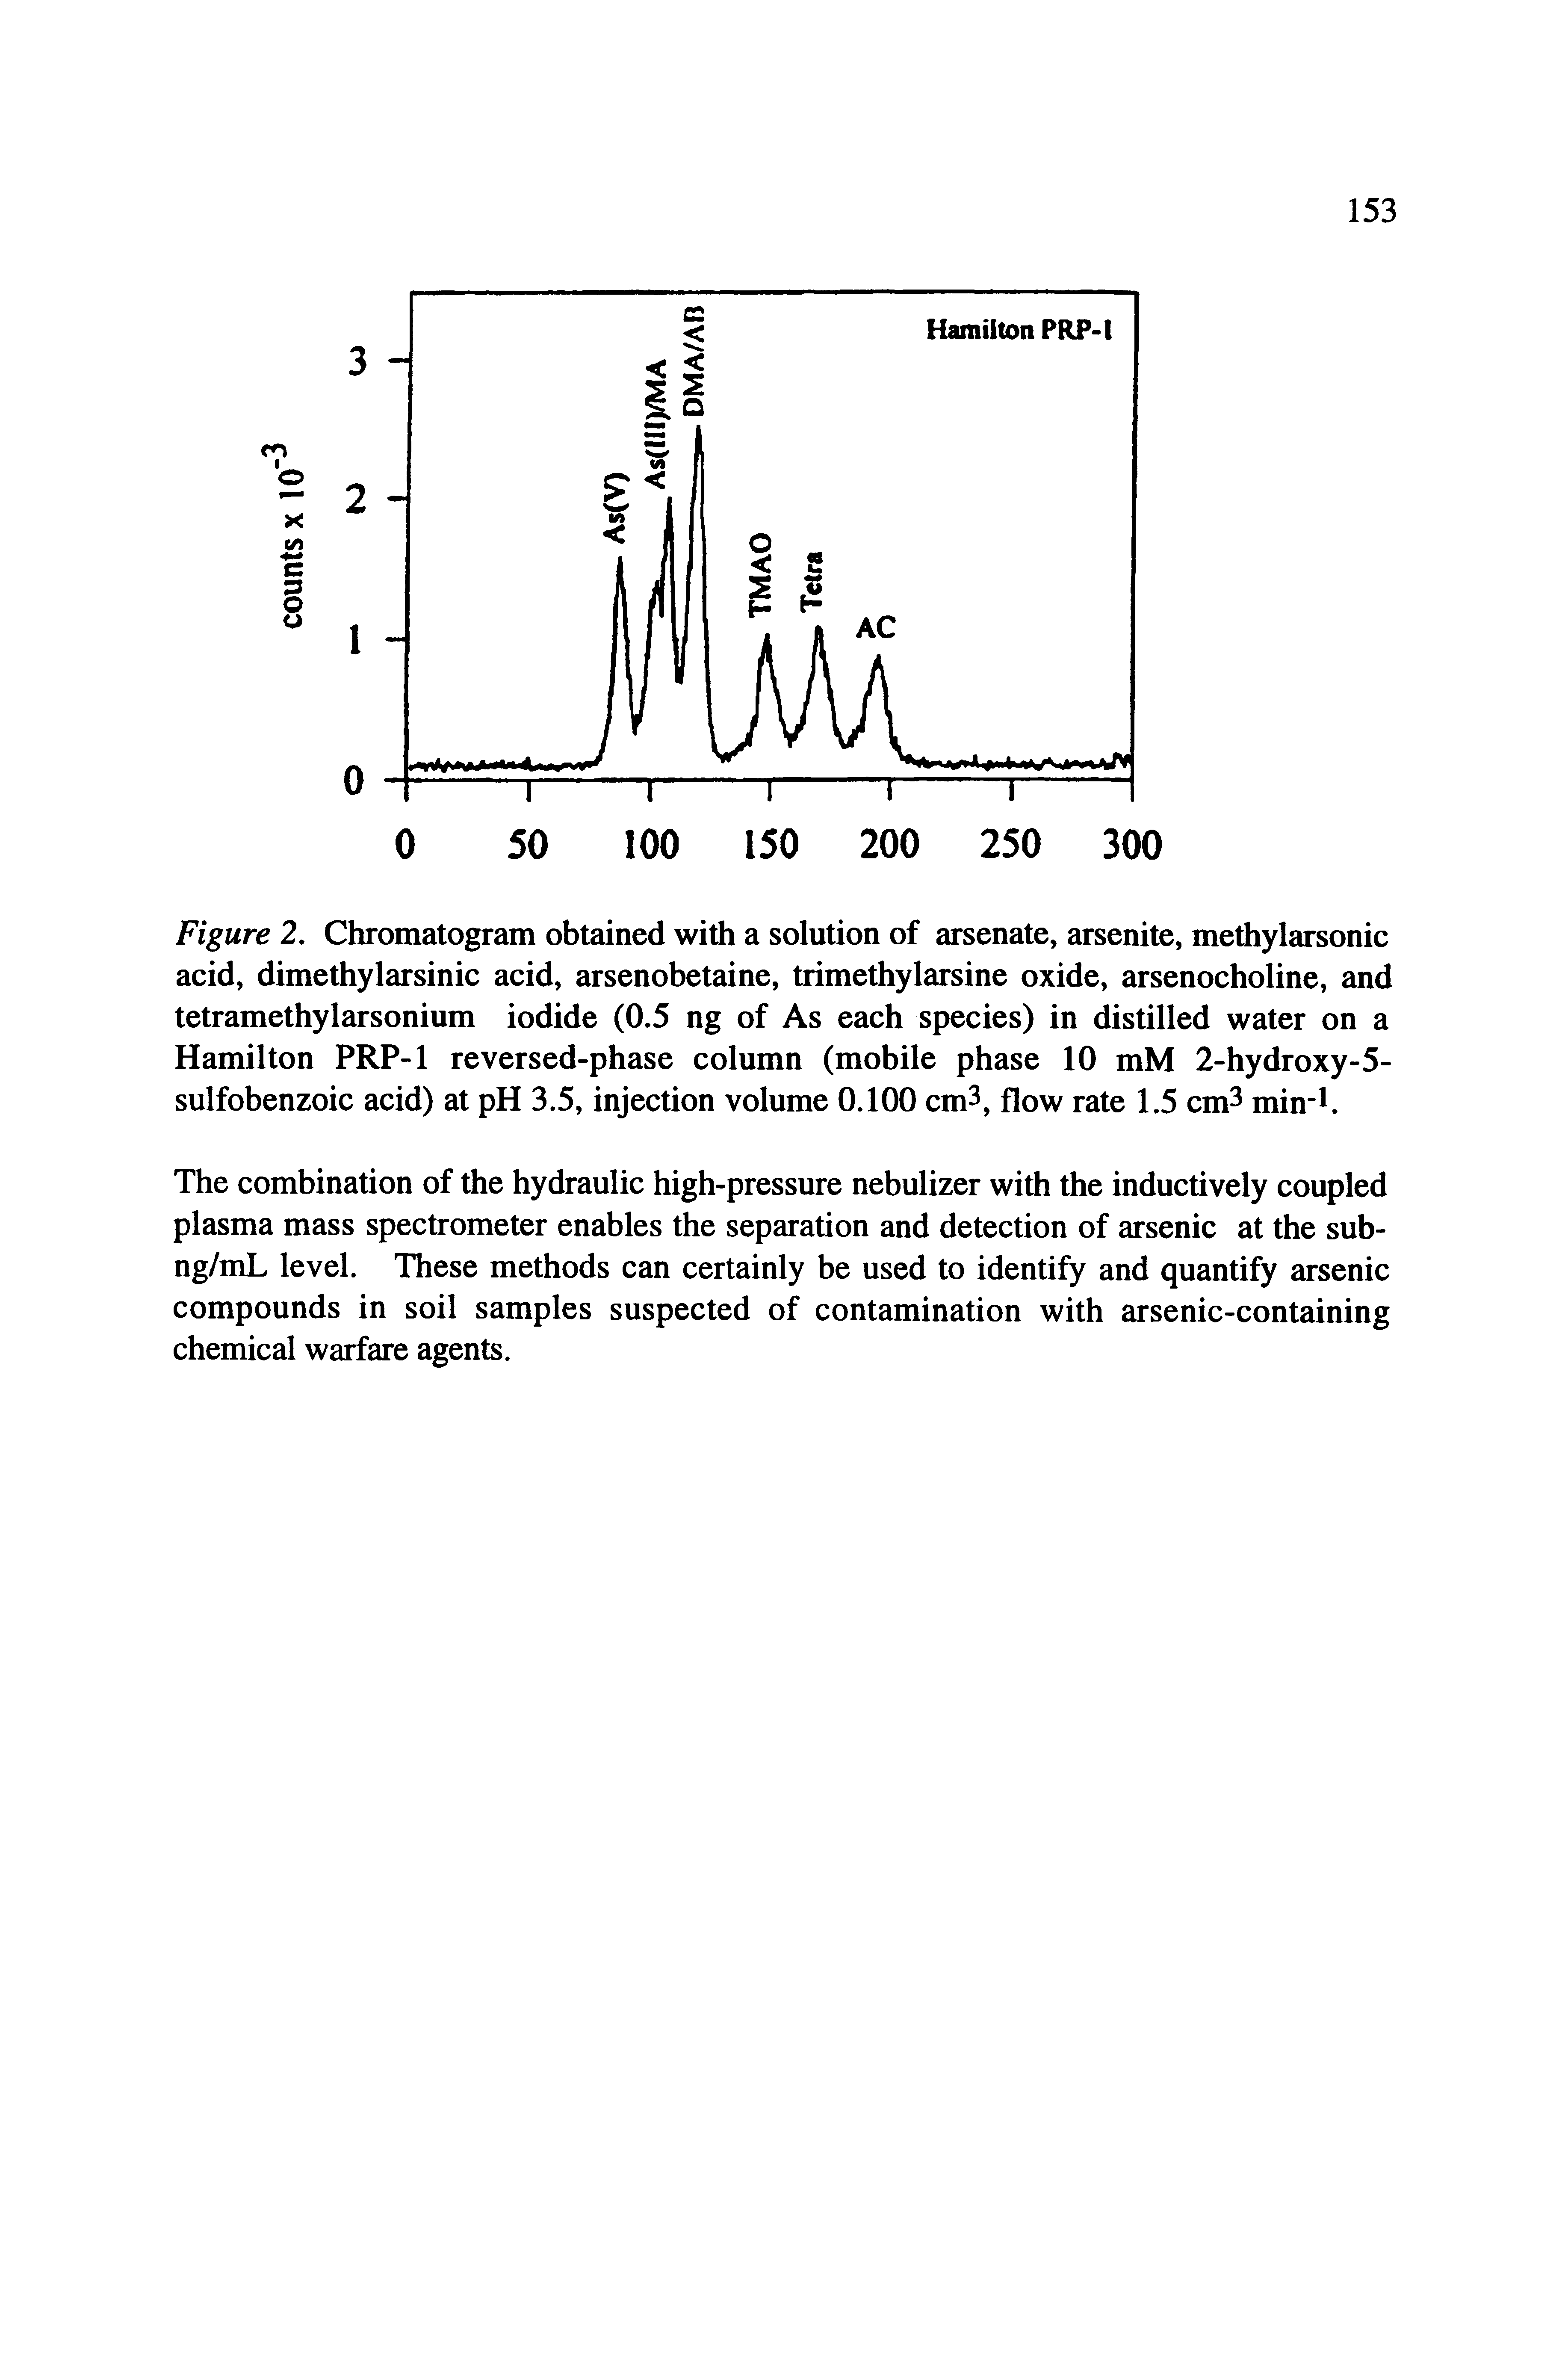 Figure 2. Chromatogram obtained with a solution of arsenate, arsenite, methylarsonic acid, dimethylarsinic acid, arsenobetaine, trimethylarsine oxide, arsenocholine, and tetramethylarsonium iodide (0.5 ng of As each species) in distilled water on a Hamilton PRP-1 re versed-phase column (mobile phase 10 mM 2-hydroxy-5-sulfobenzoic acid) at pH 3.5, injection volume 0.100 cm3, flow rate 1.5 cm3 min-l.